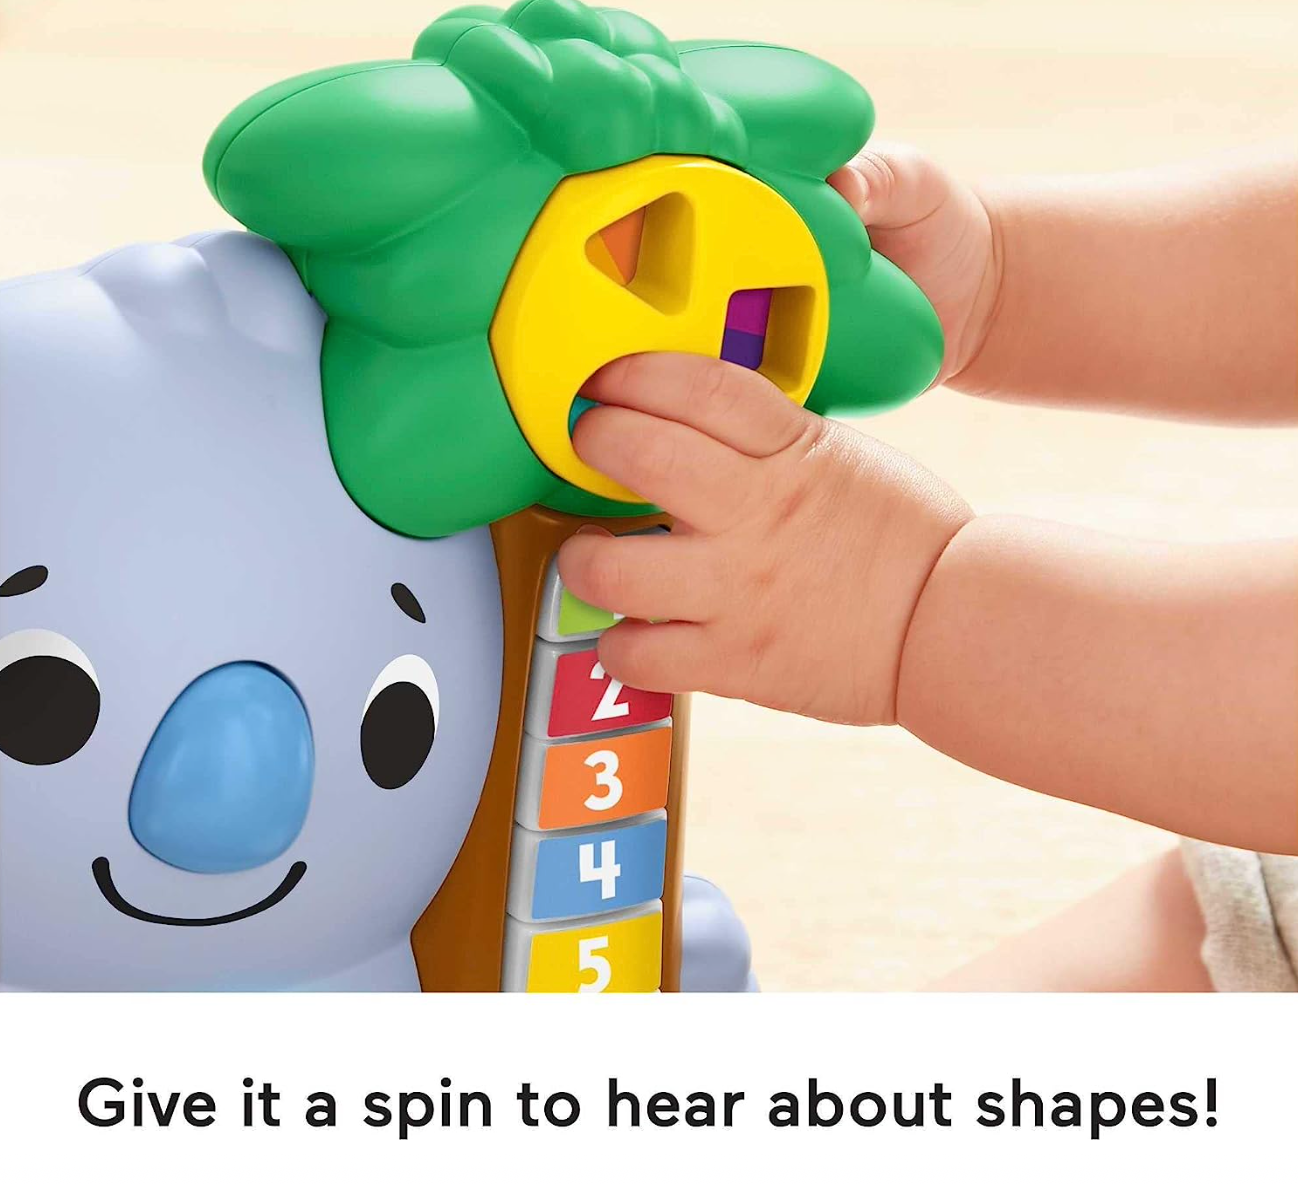 Fisher-Price Linkimals Baby Learning Toy Counting Koala With Interactive Lights And Music For Ages 9+ Months